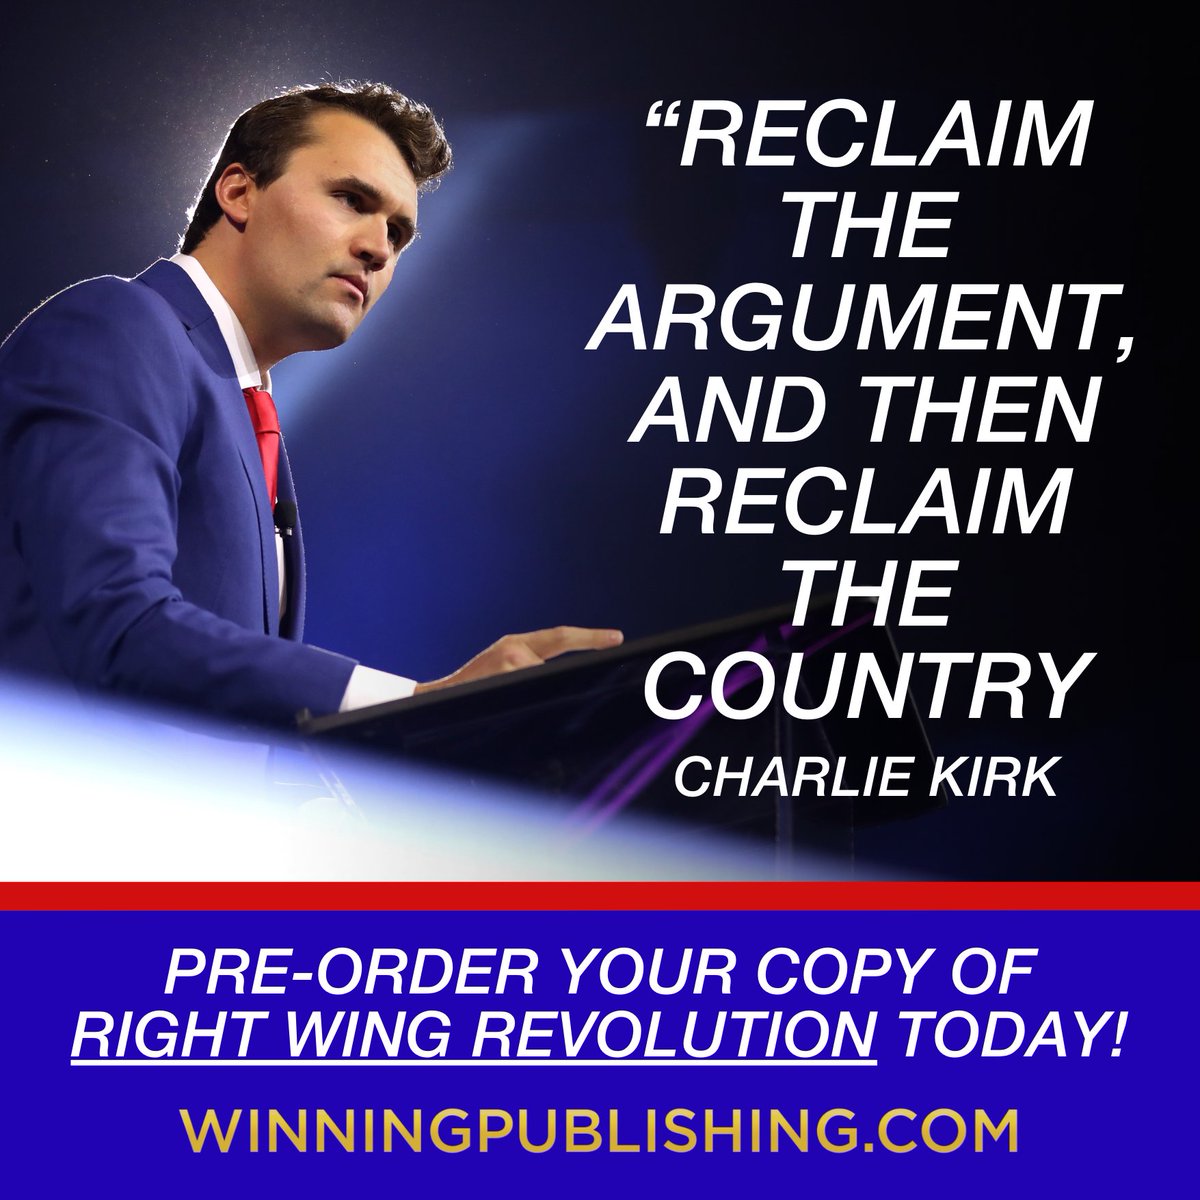 .@charliekirk11's new book RIGHT WING REVOLUTION is available for pre-order today at WINNINGPUBLISHING.com!